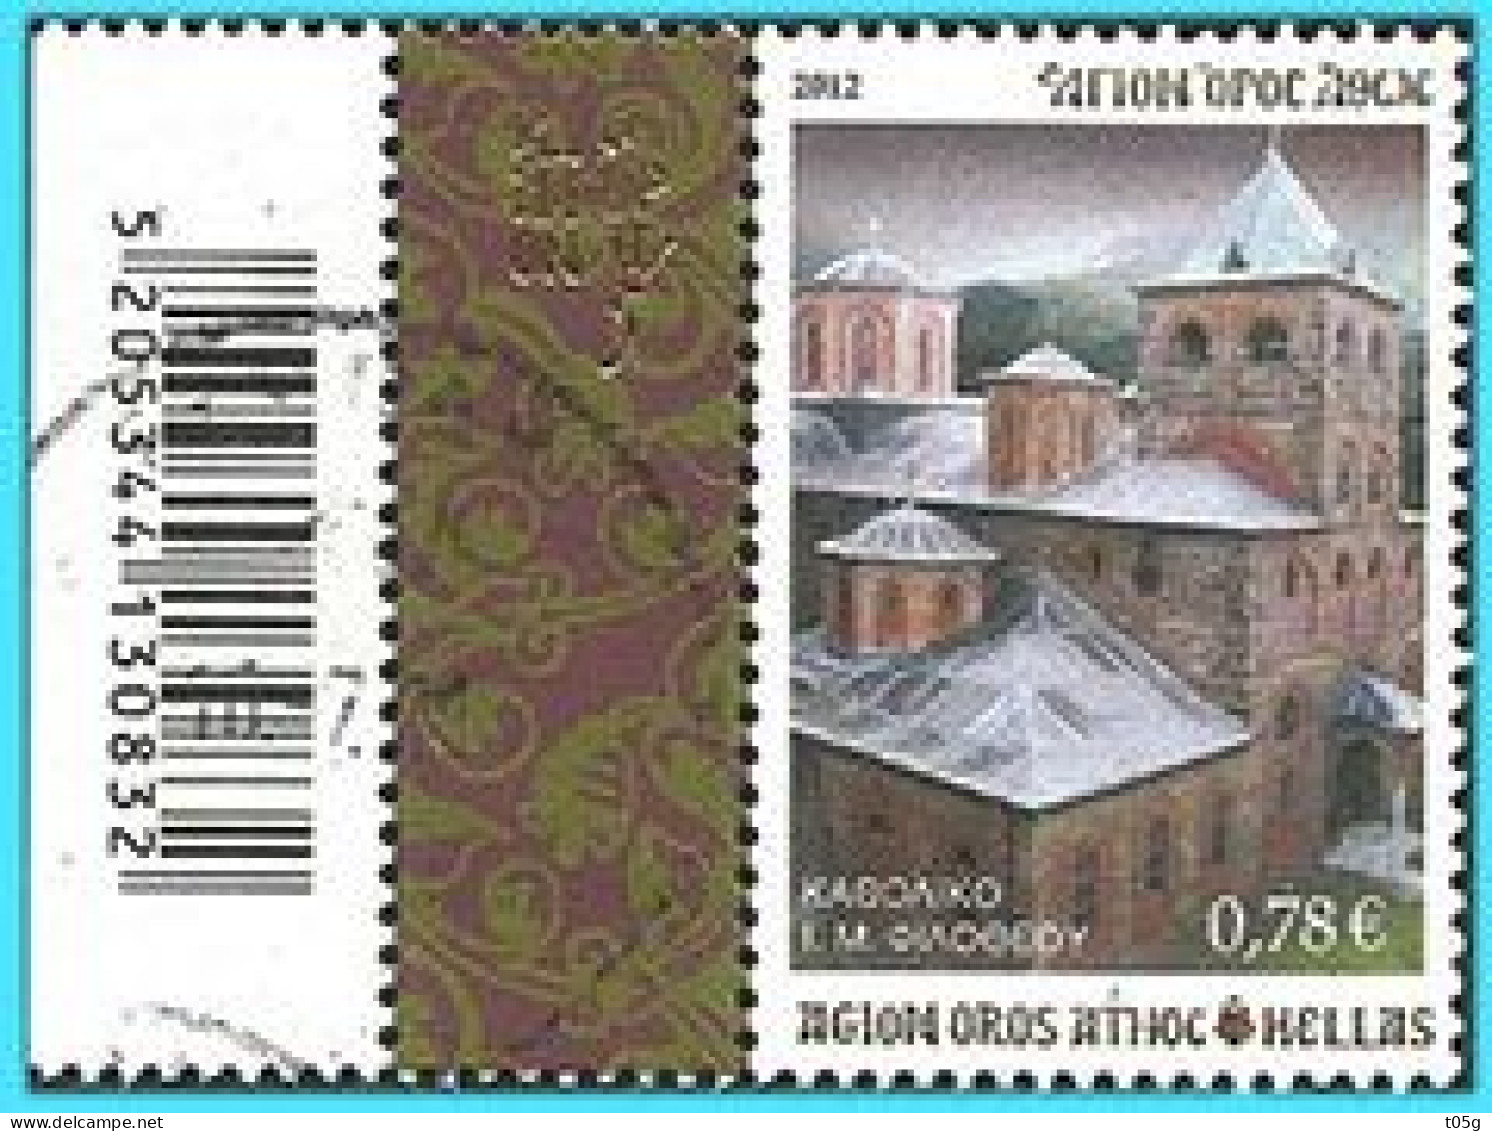 GREECE- GRECE- HELLAS - AGION OROS 2012: 0.78€  (with Barcode) From Set Used - Used Stamps